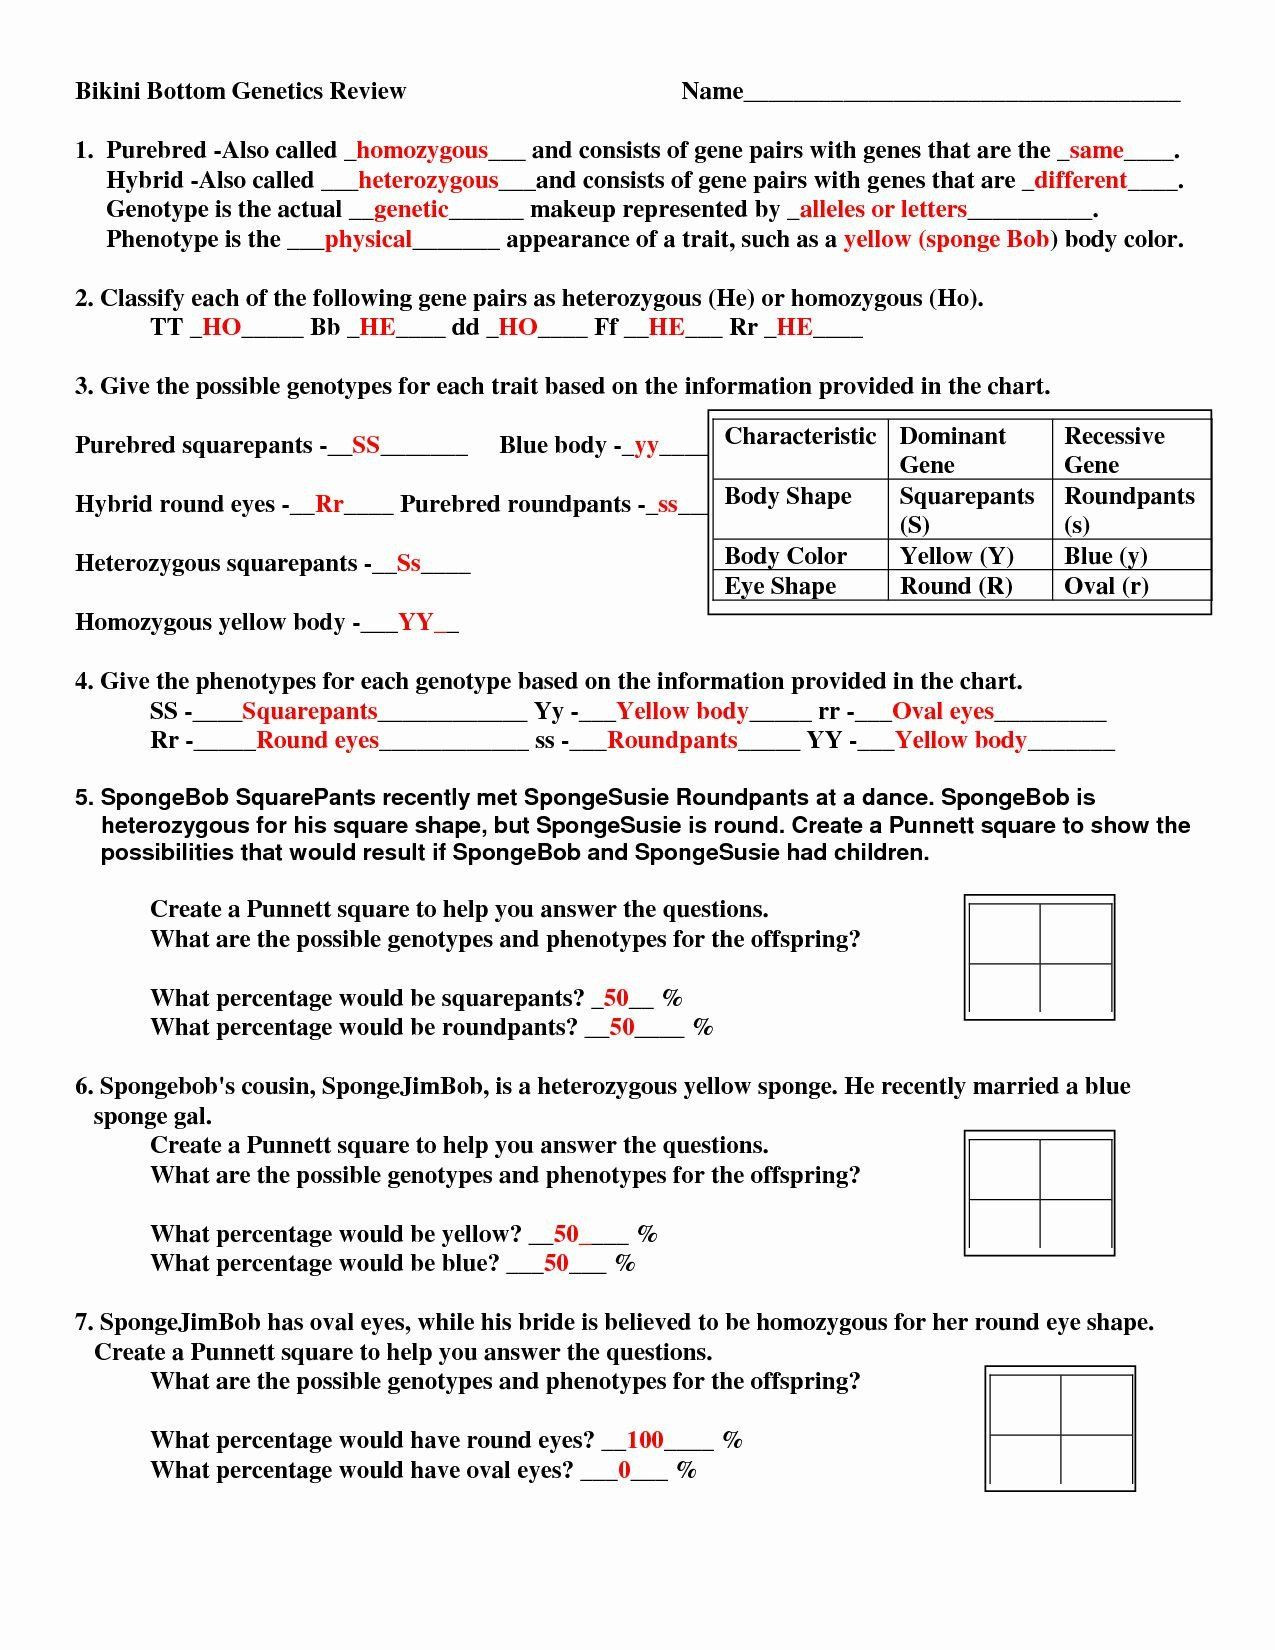 Genotypes and Phenotypes Worksheet Answers Pin On Printable Blank Worksheet Template